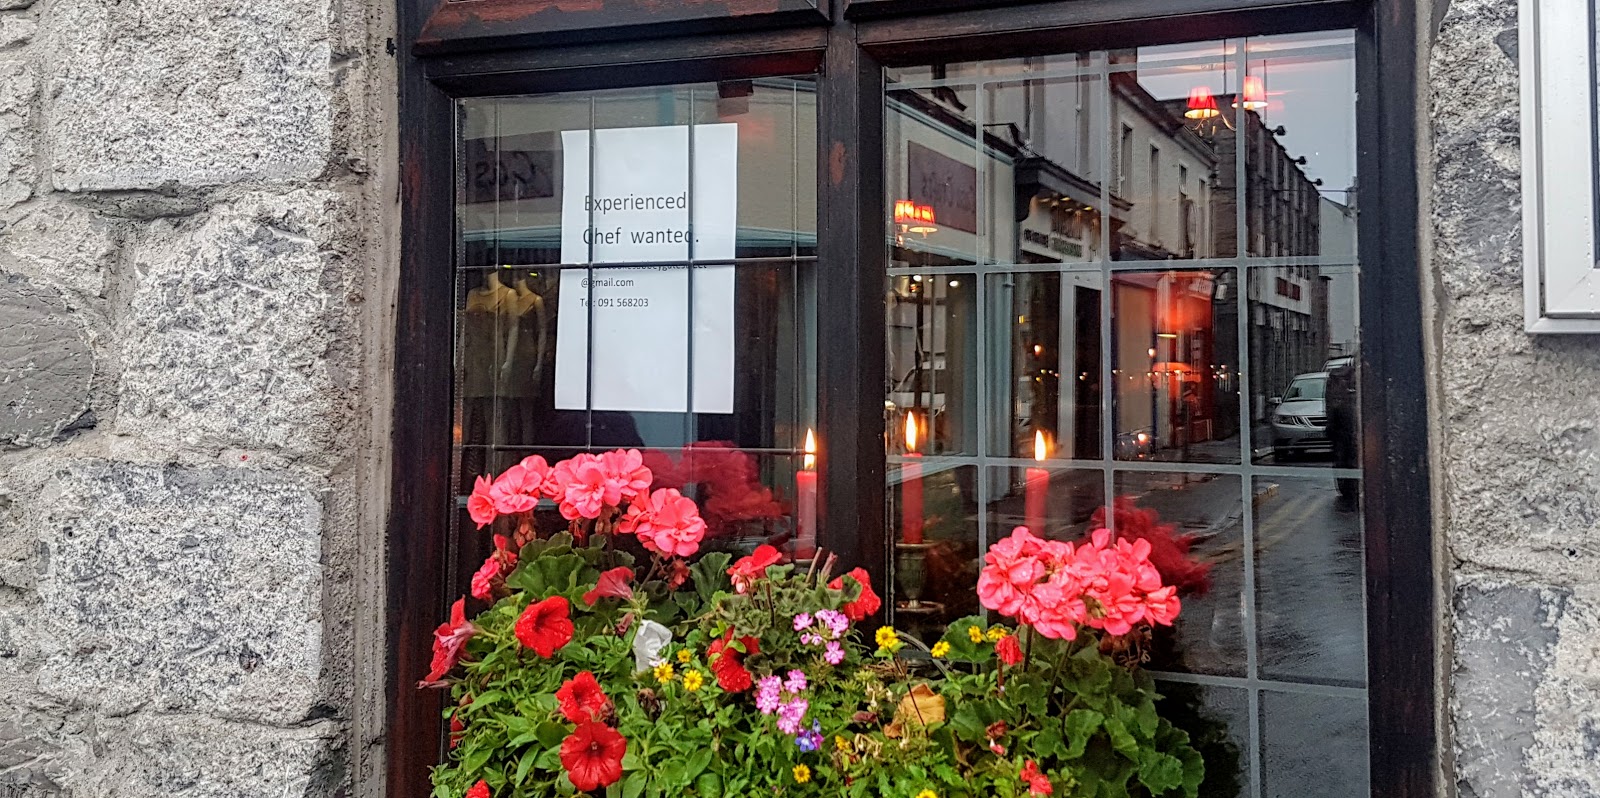 restaurant window with pink flowers in the window box, candles inside - and a chef-wanted sign